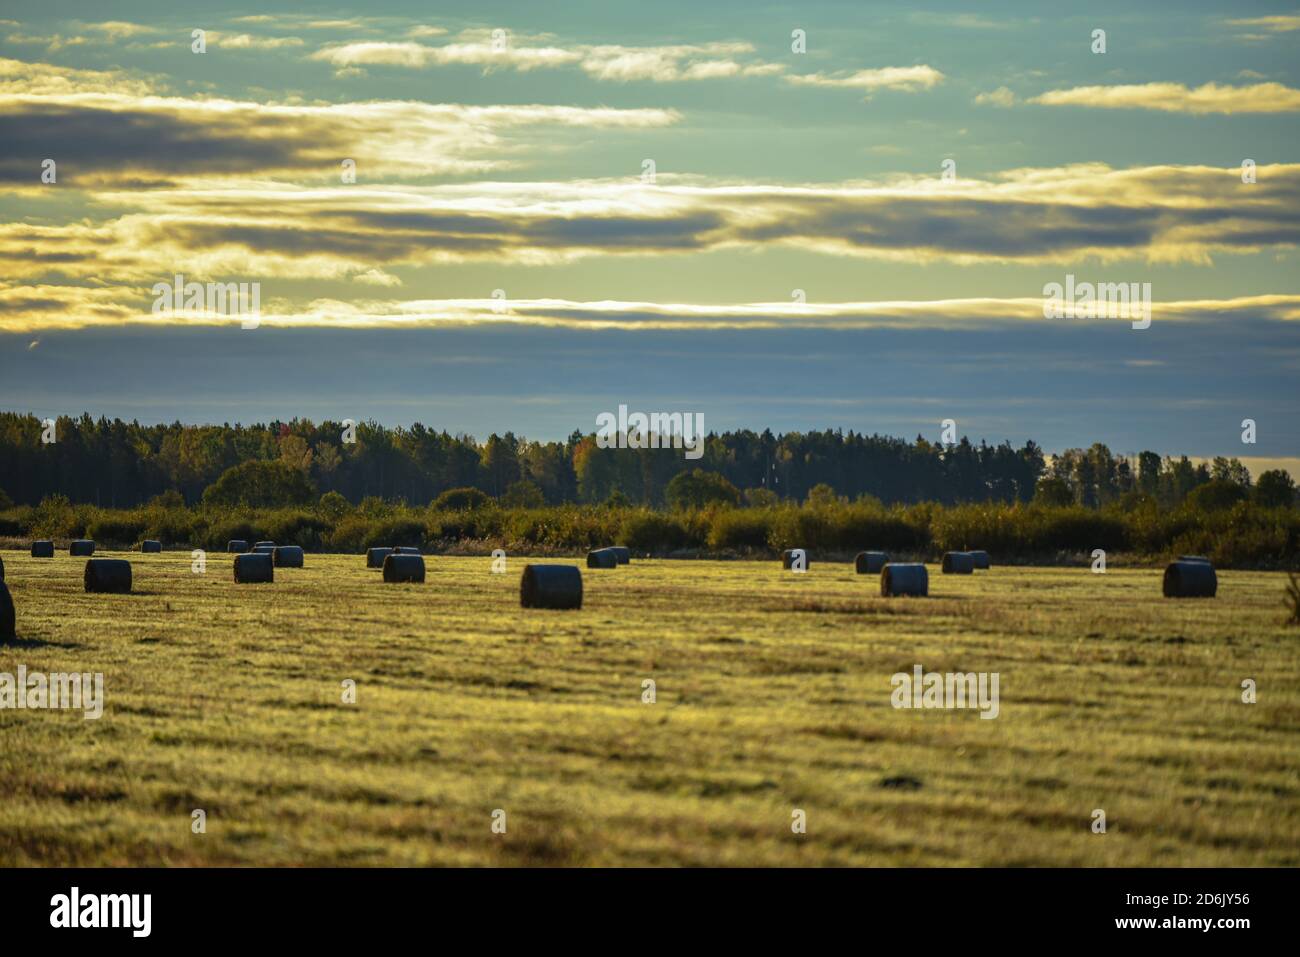 view of a grassy haystack meadow in the early morning covered with trees and shrubs, but clouds in the sky with sunlight Stock Photo